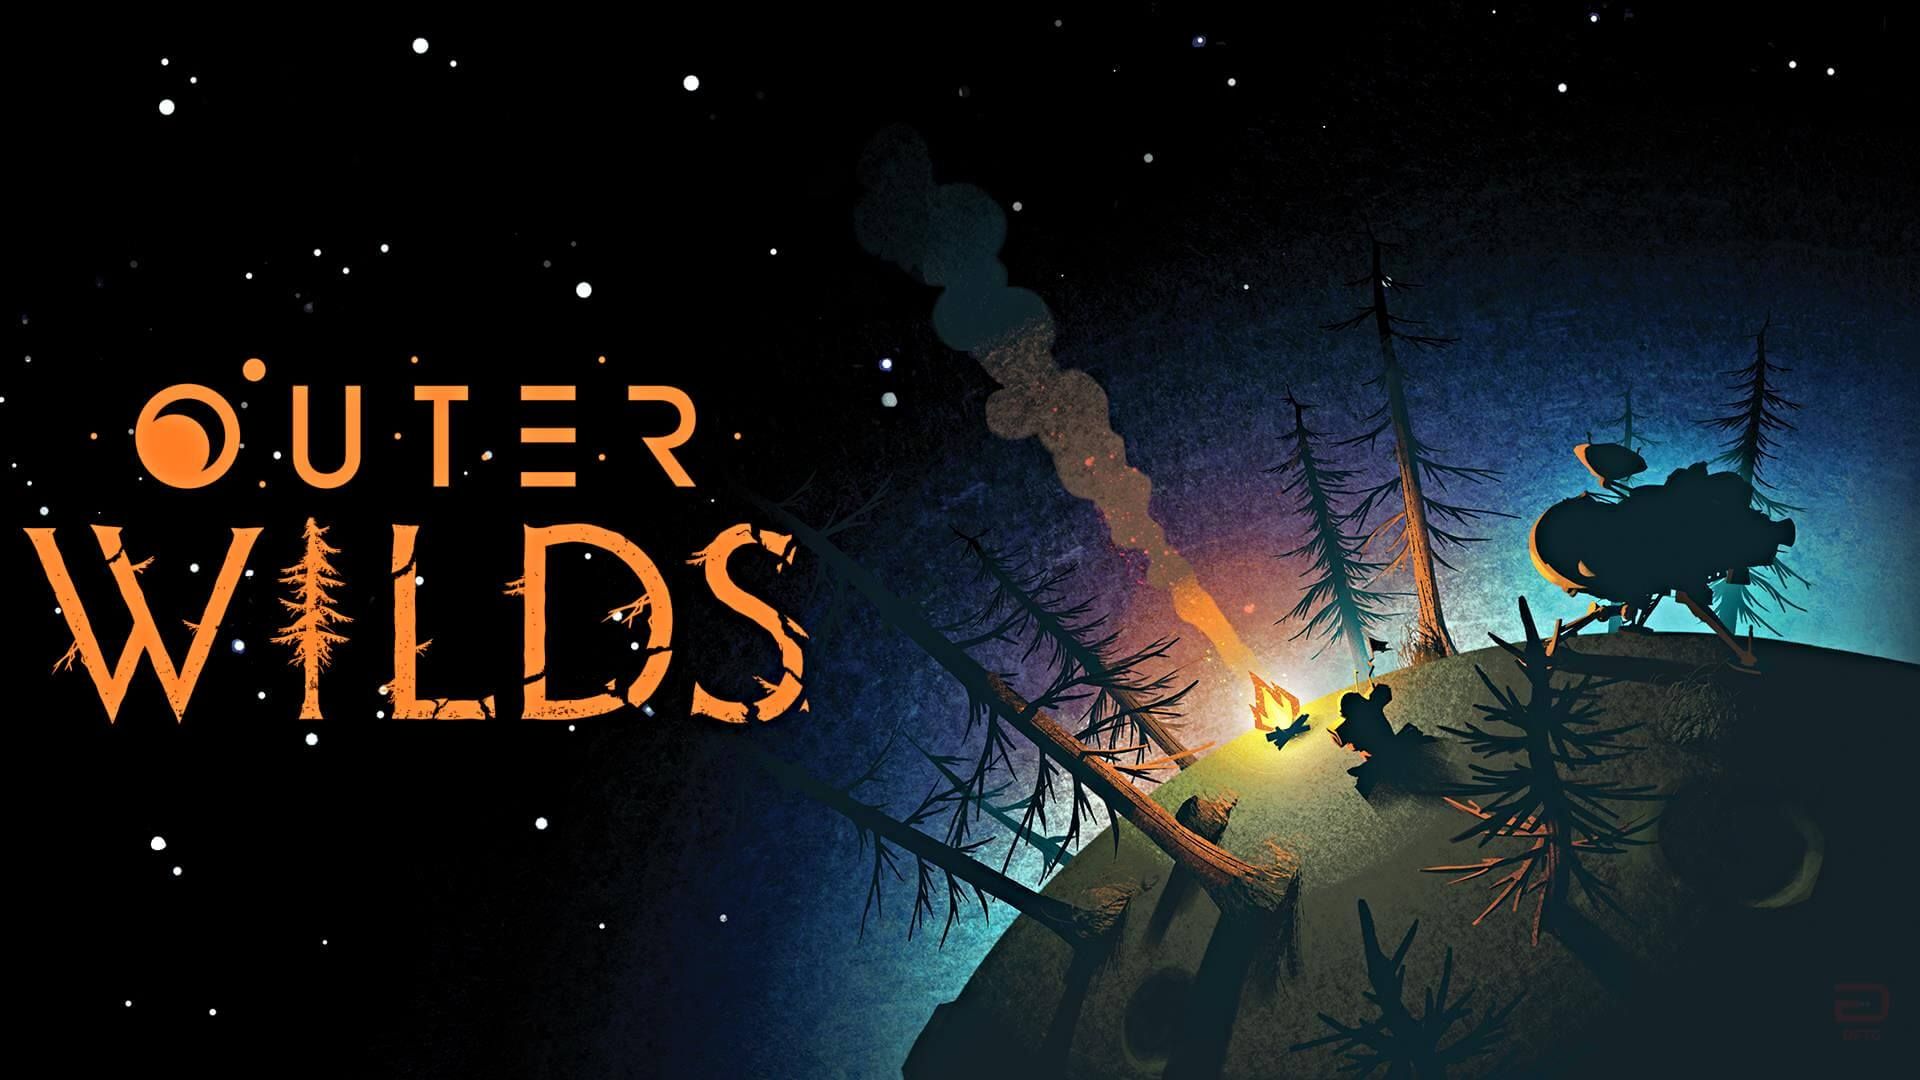 The Outer Wilds Review - An Existential Journey